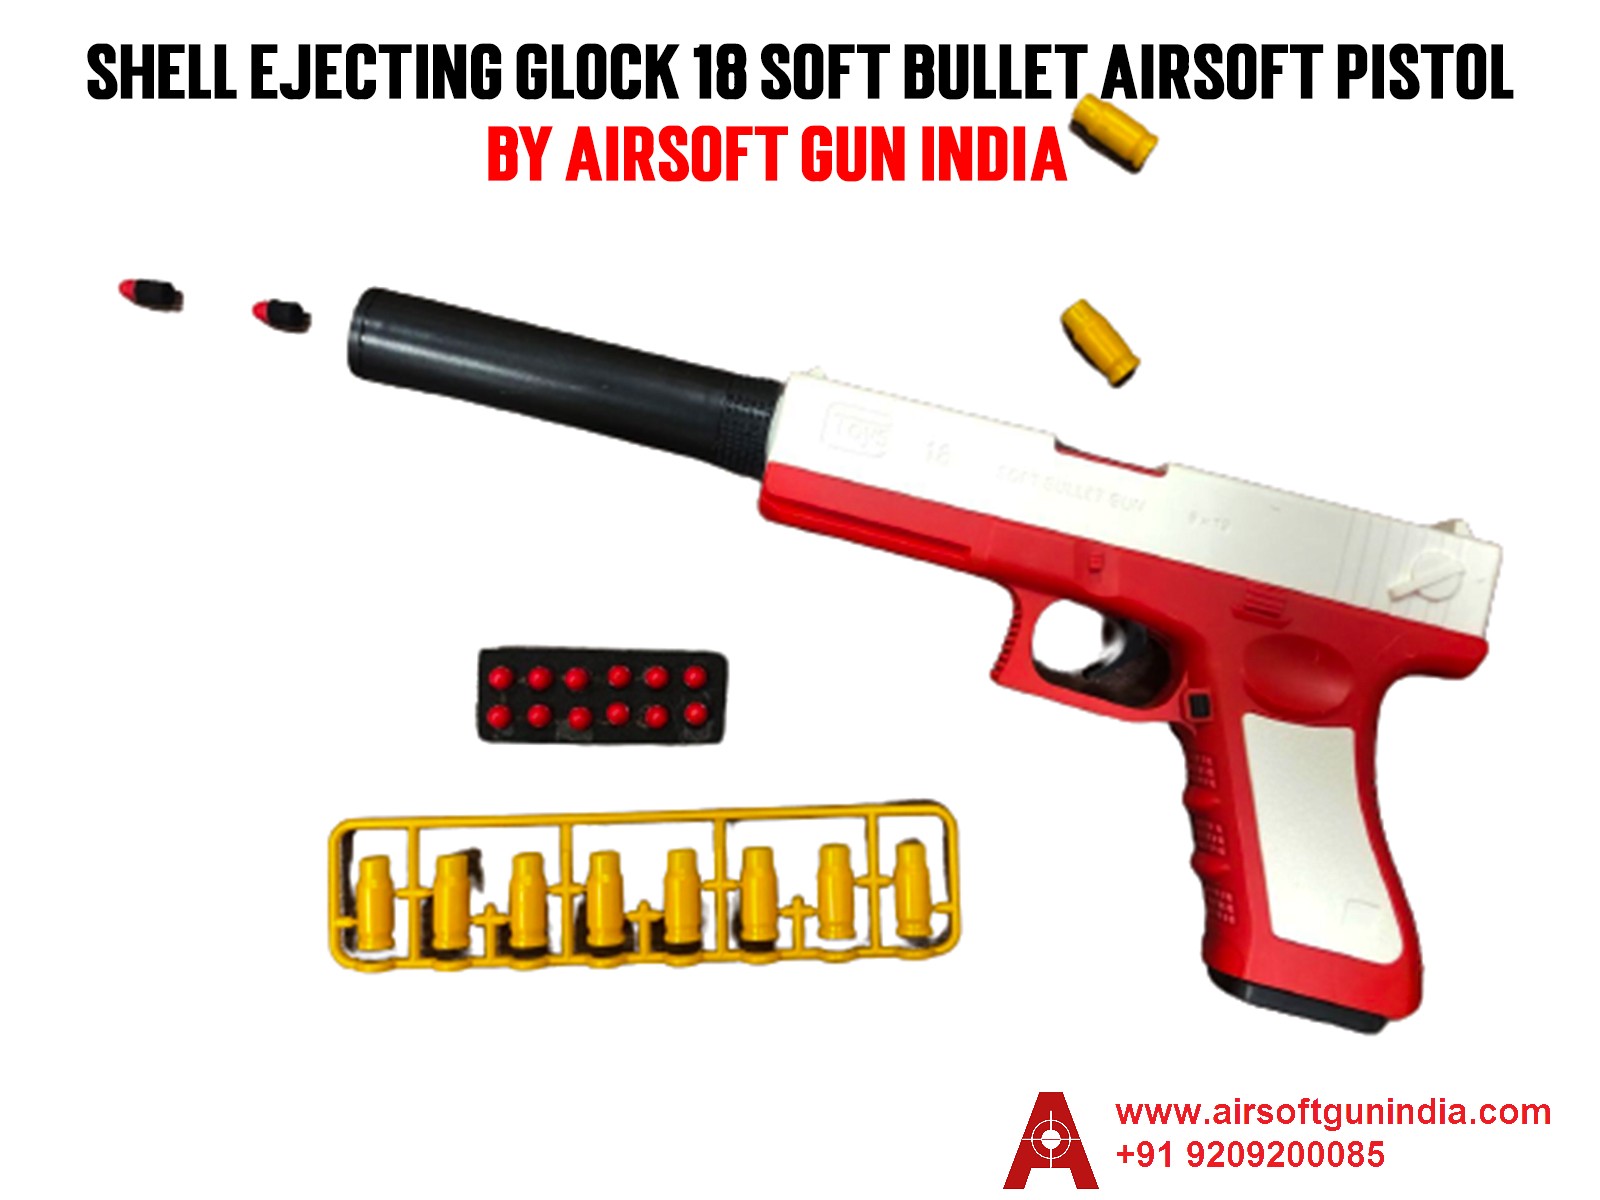 Shell Ejecting Glock 18 Soft Bullet Airsoft Pistol-Red Shade